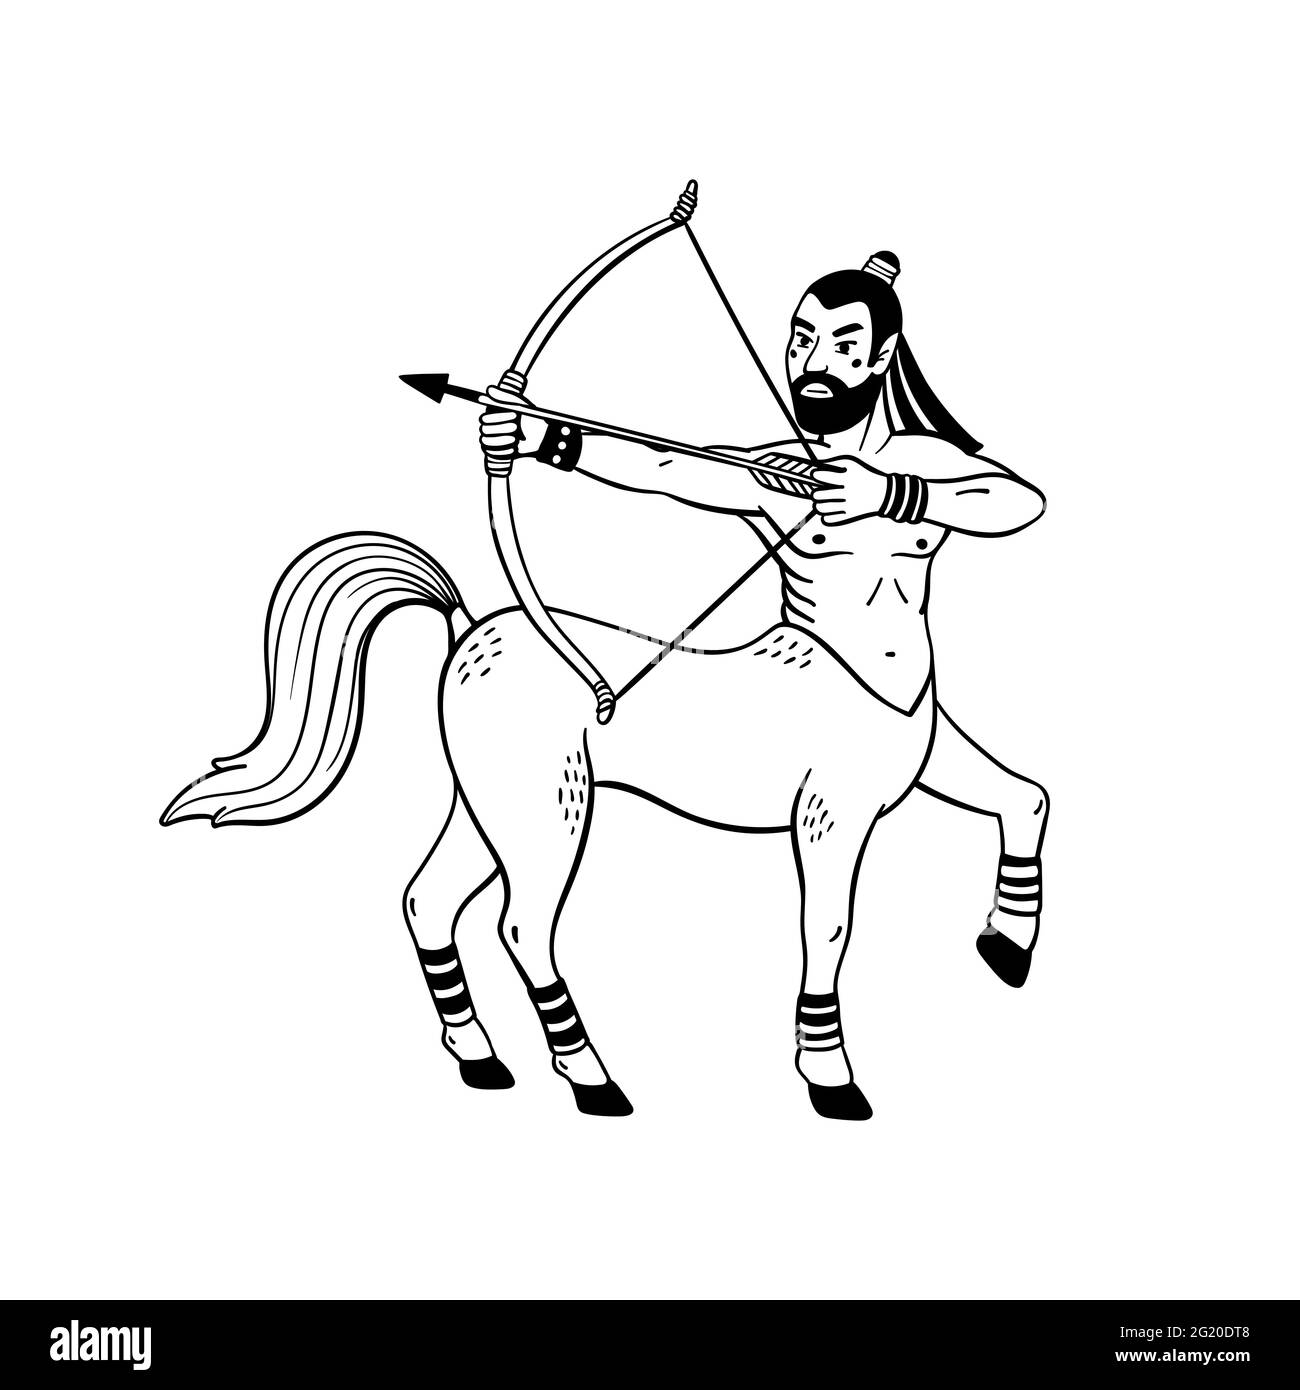 Magical creatures set. Mythological creature - centaur. Doodle style black and white vector illustration isolated on white background. Tattoo design o Stock Vector